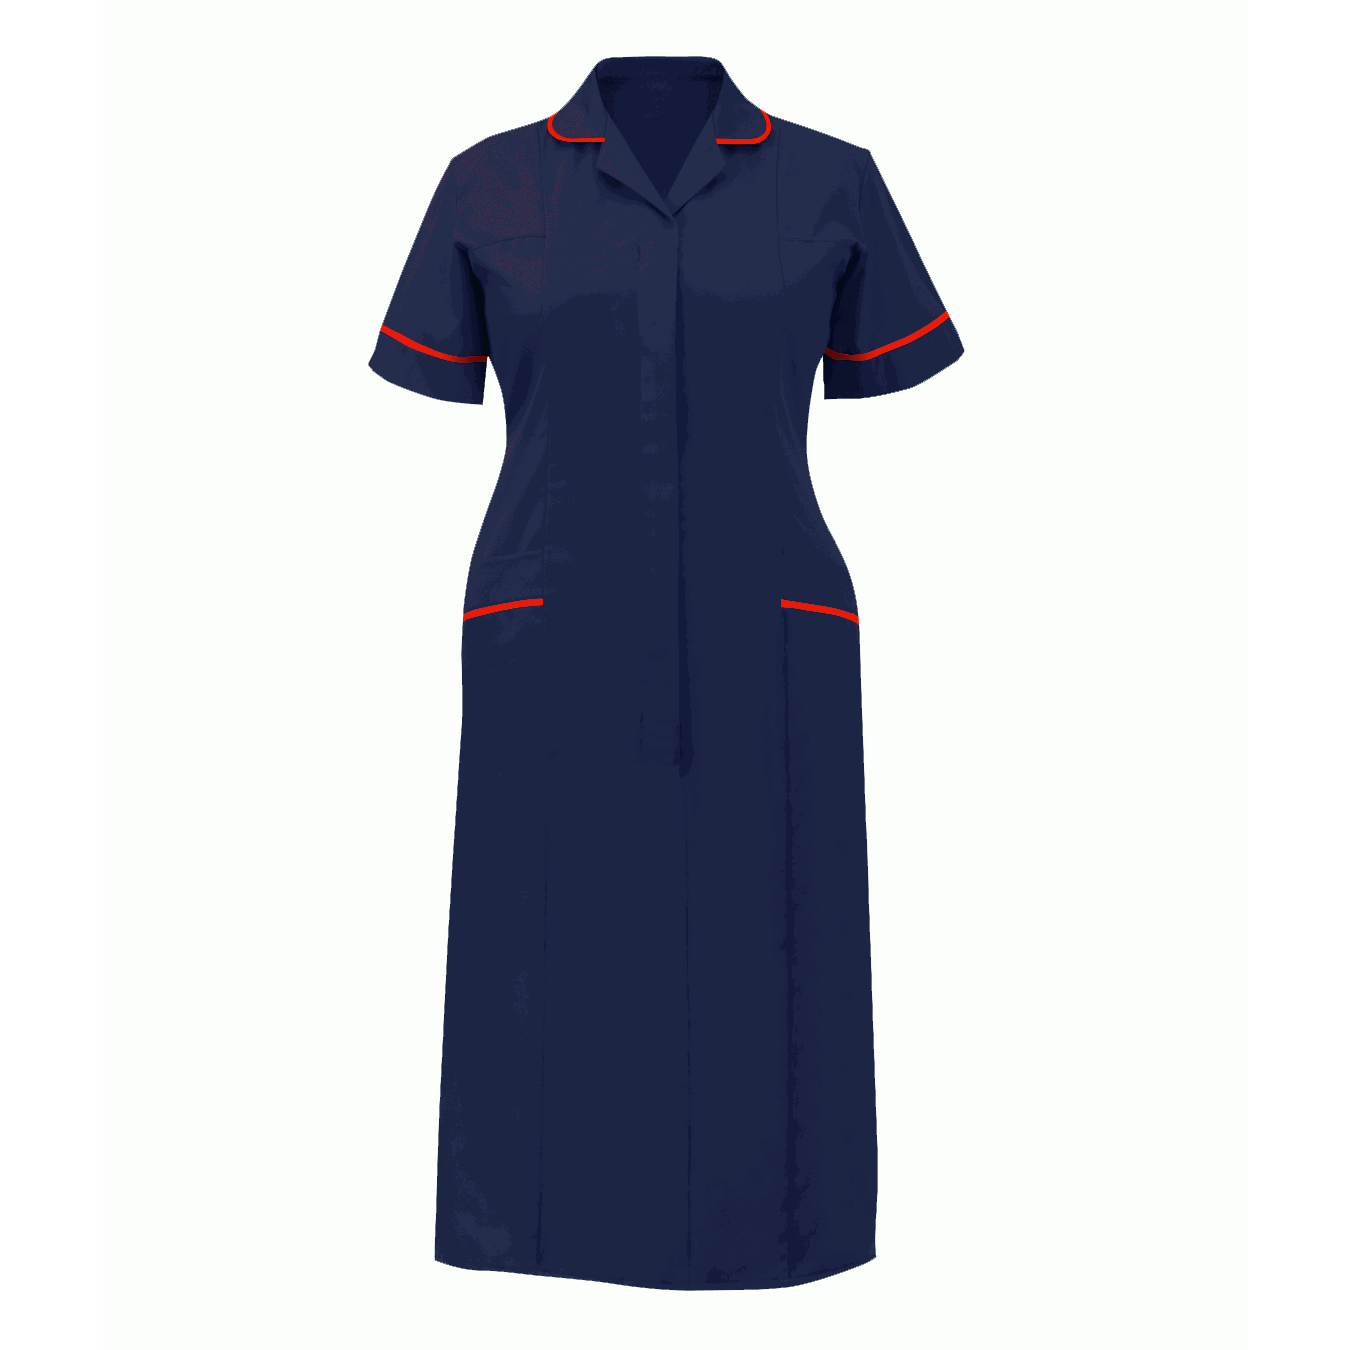 CLASSIC STEPIN DRESS: LADIES NAVY & RED